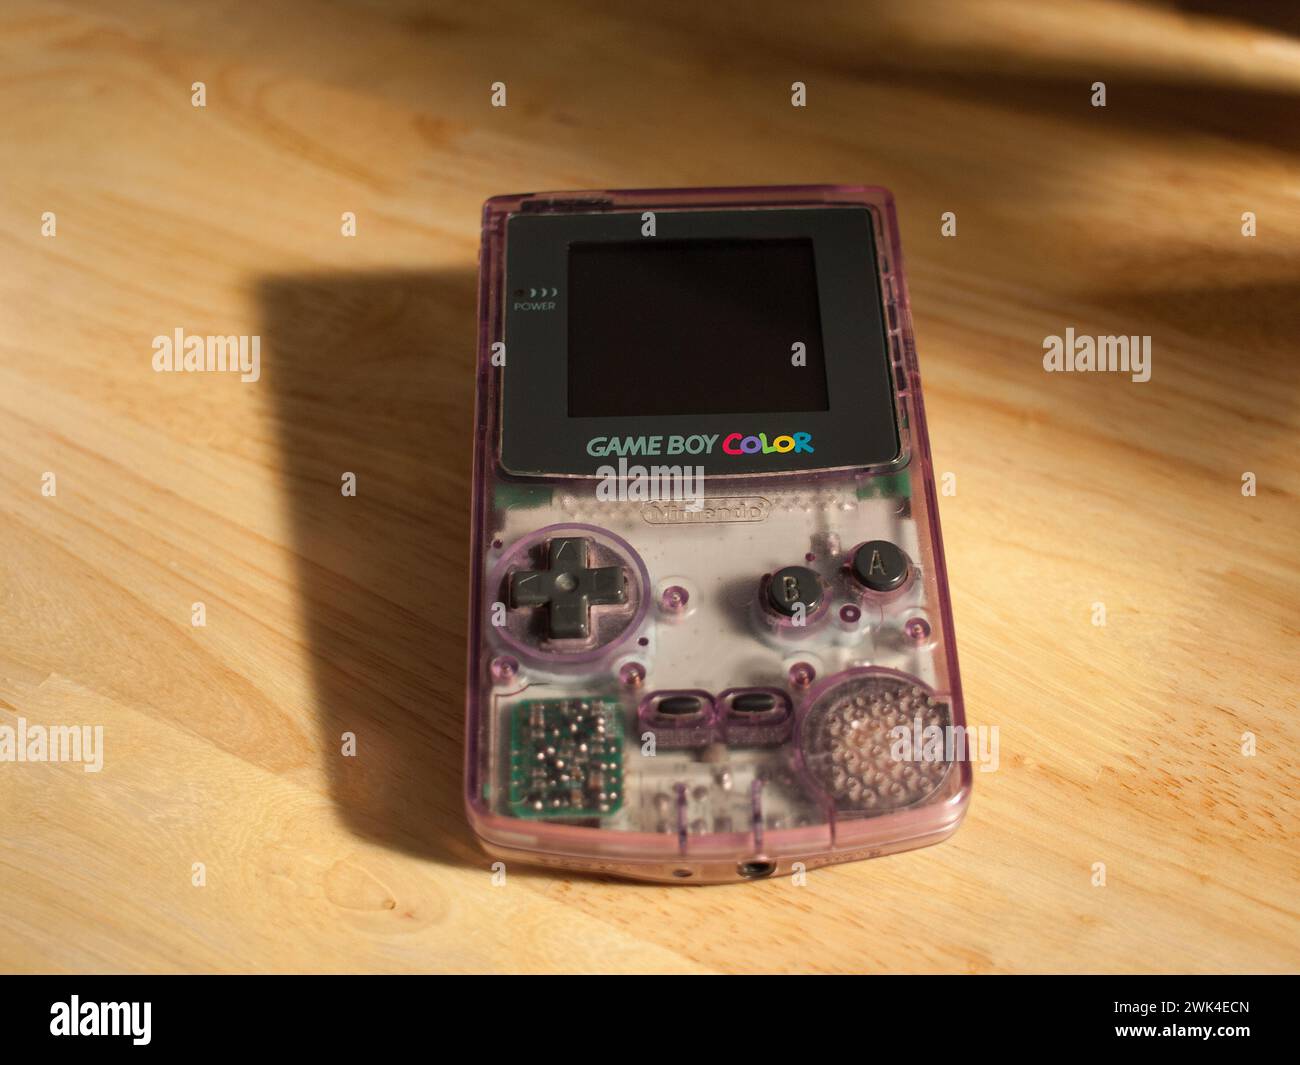 Miami, Florida, United States - November 26, 2023: Vintage Nintendo Game Boy Color handheld console color model Atomic Purple on a table. Stock Photo